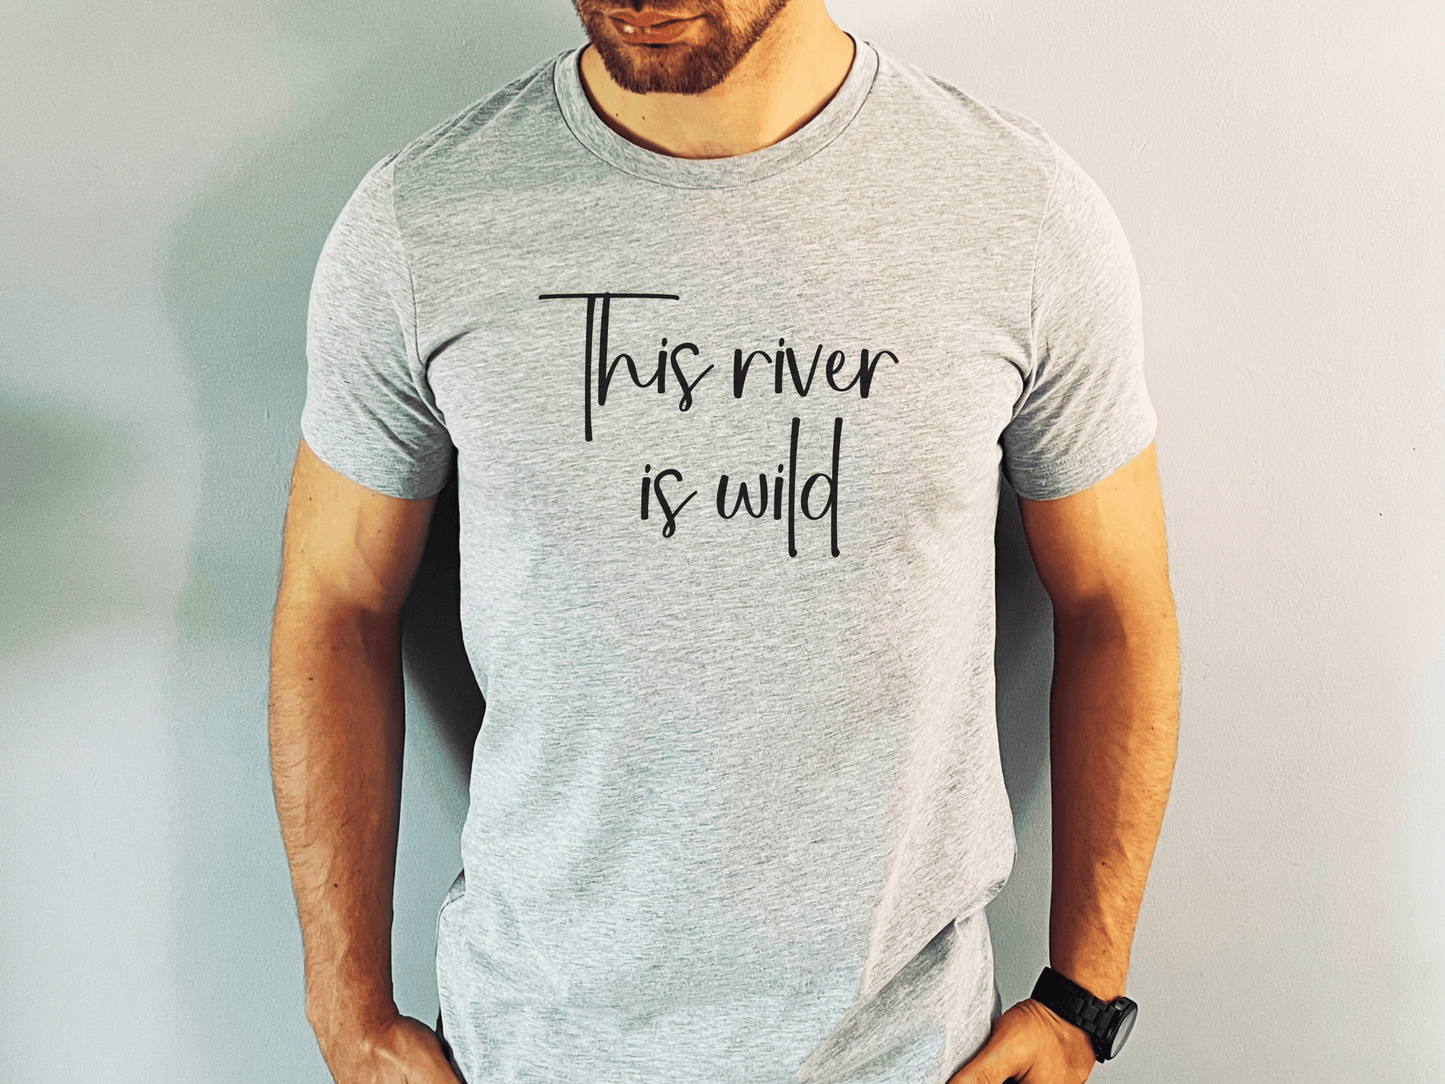 The KIllers "This River is Wild" T-Shirt in Athletic Heather on a male.